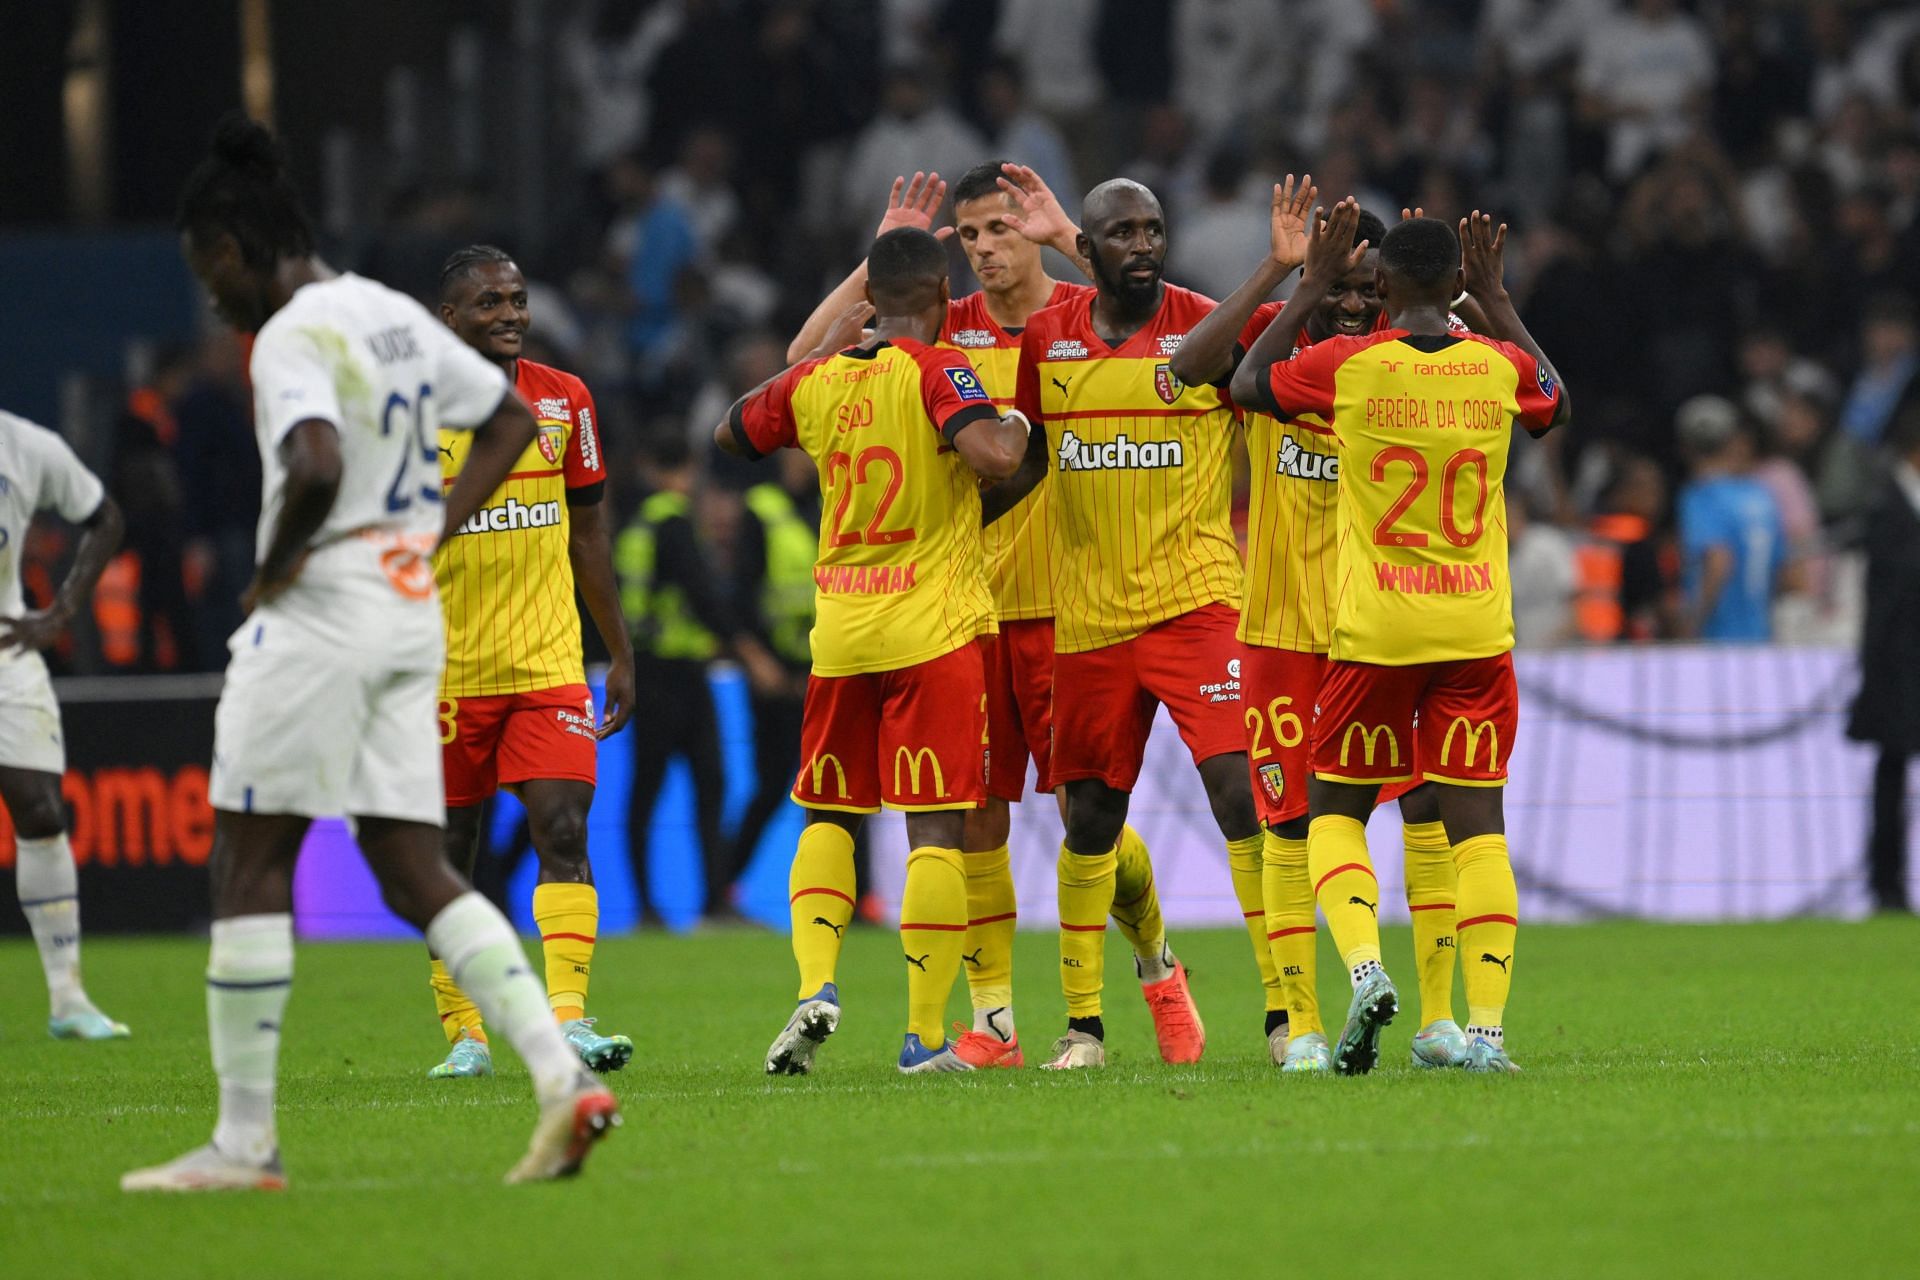 Lens will host Toulouse on Friday - Ligue 1 